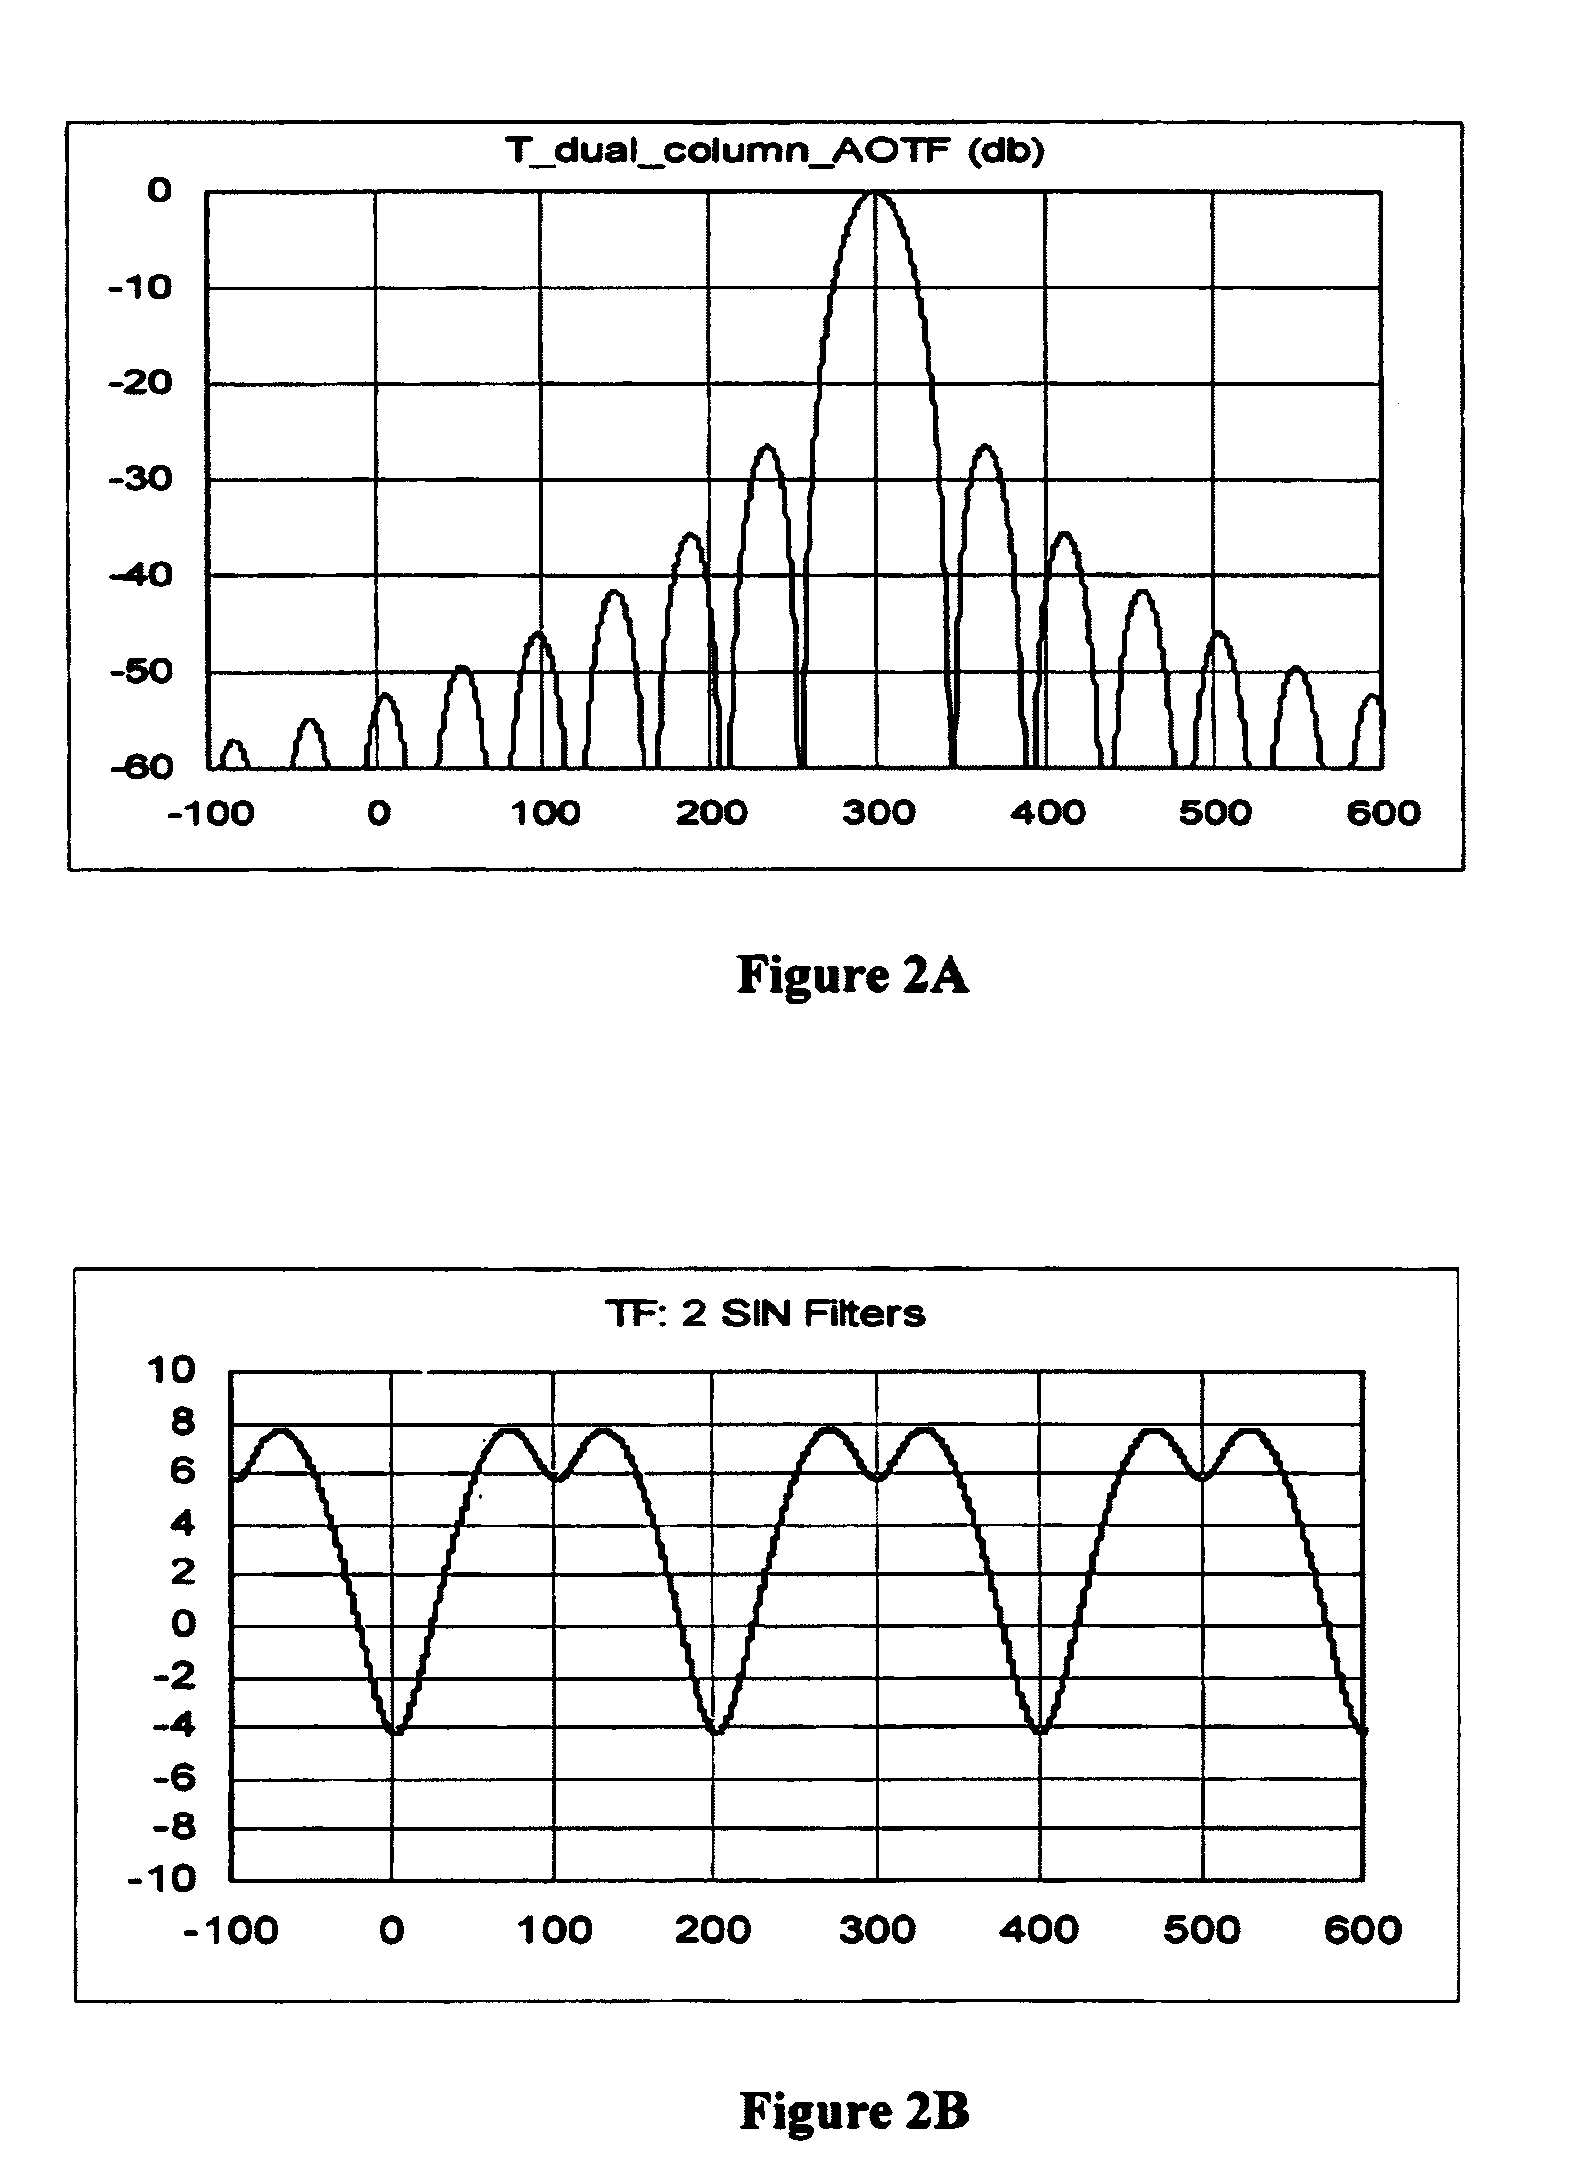 Tuning a narrow band filter for telecommunication applications with an acoustic optical tunable filter